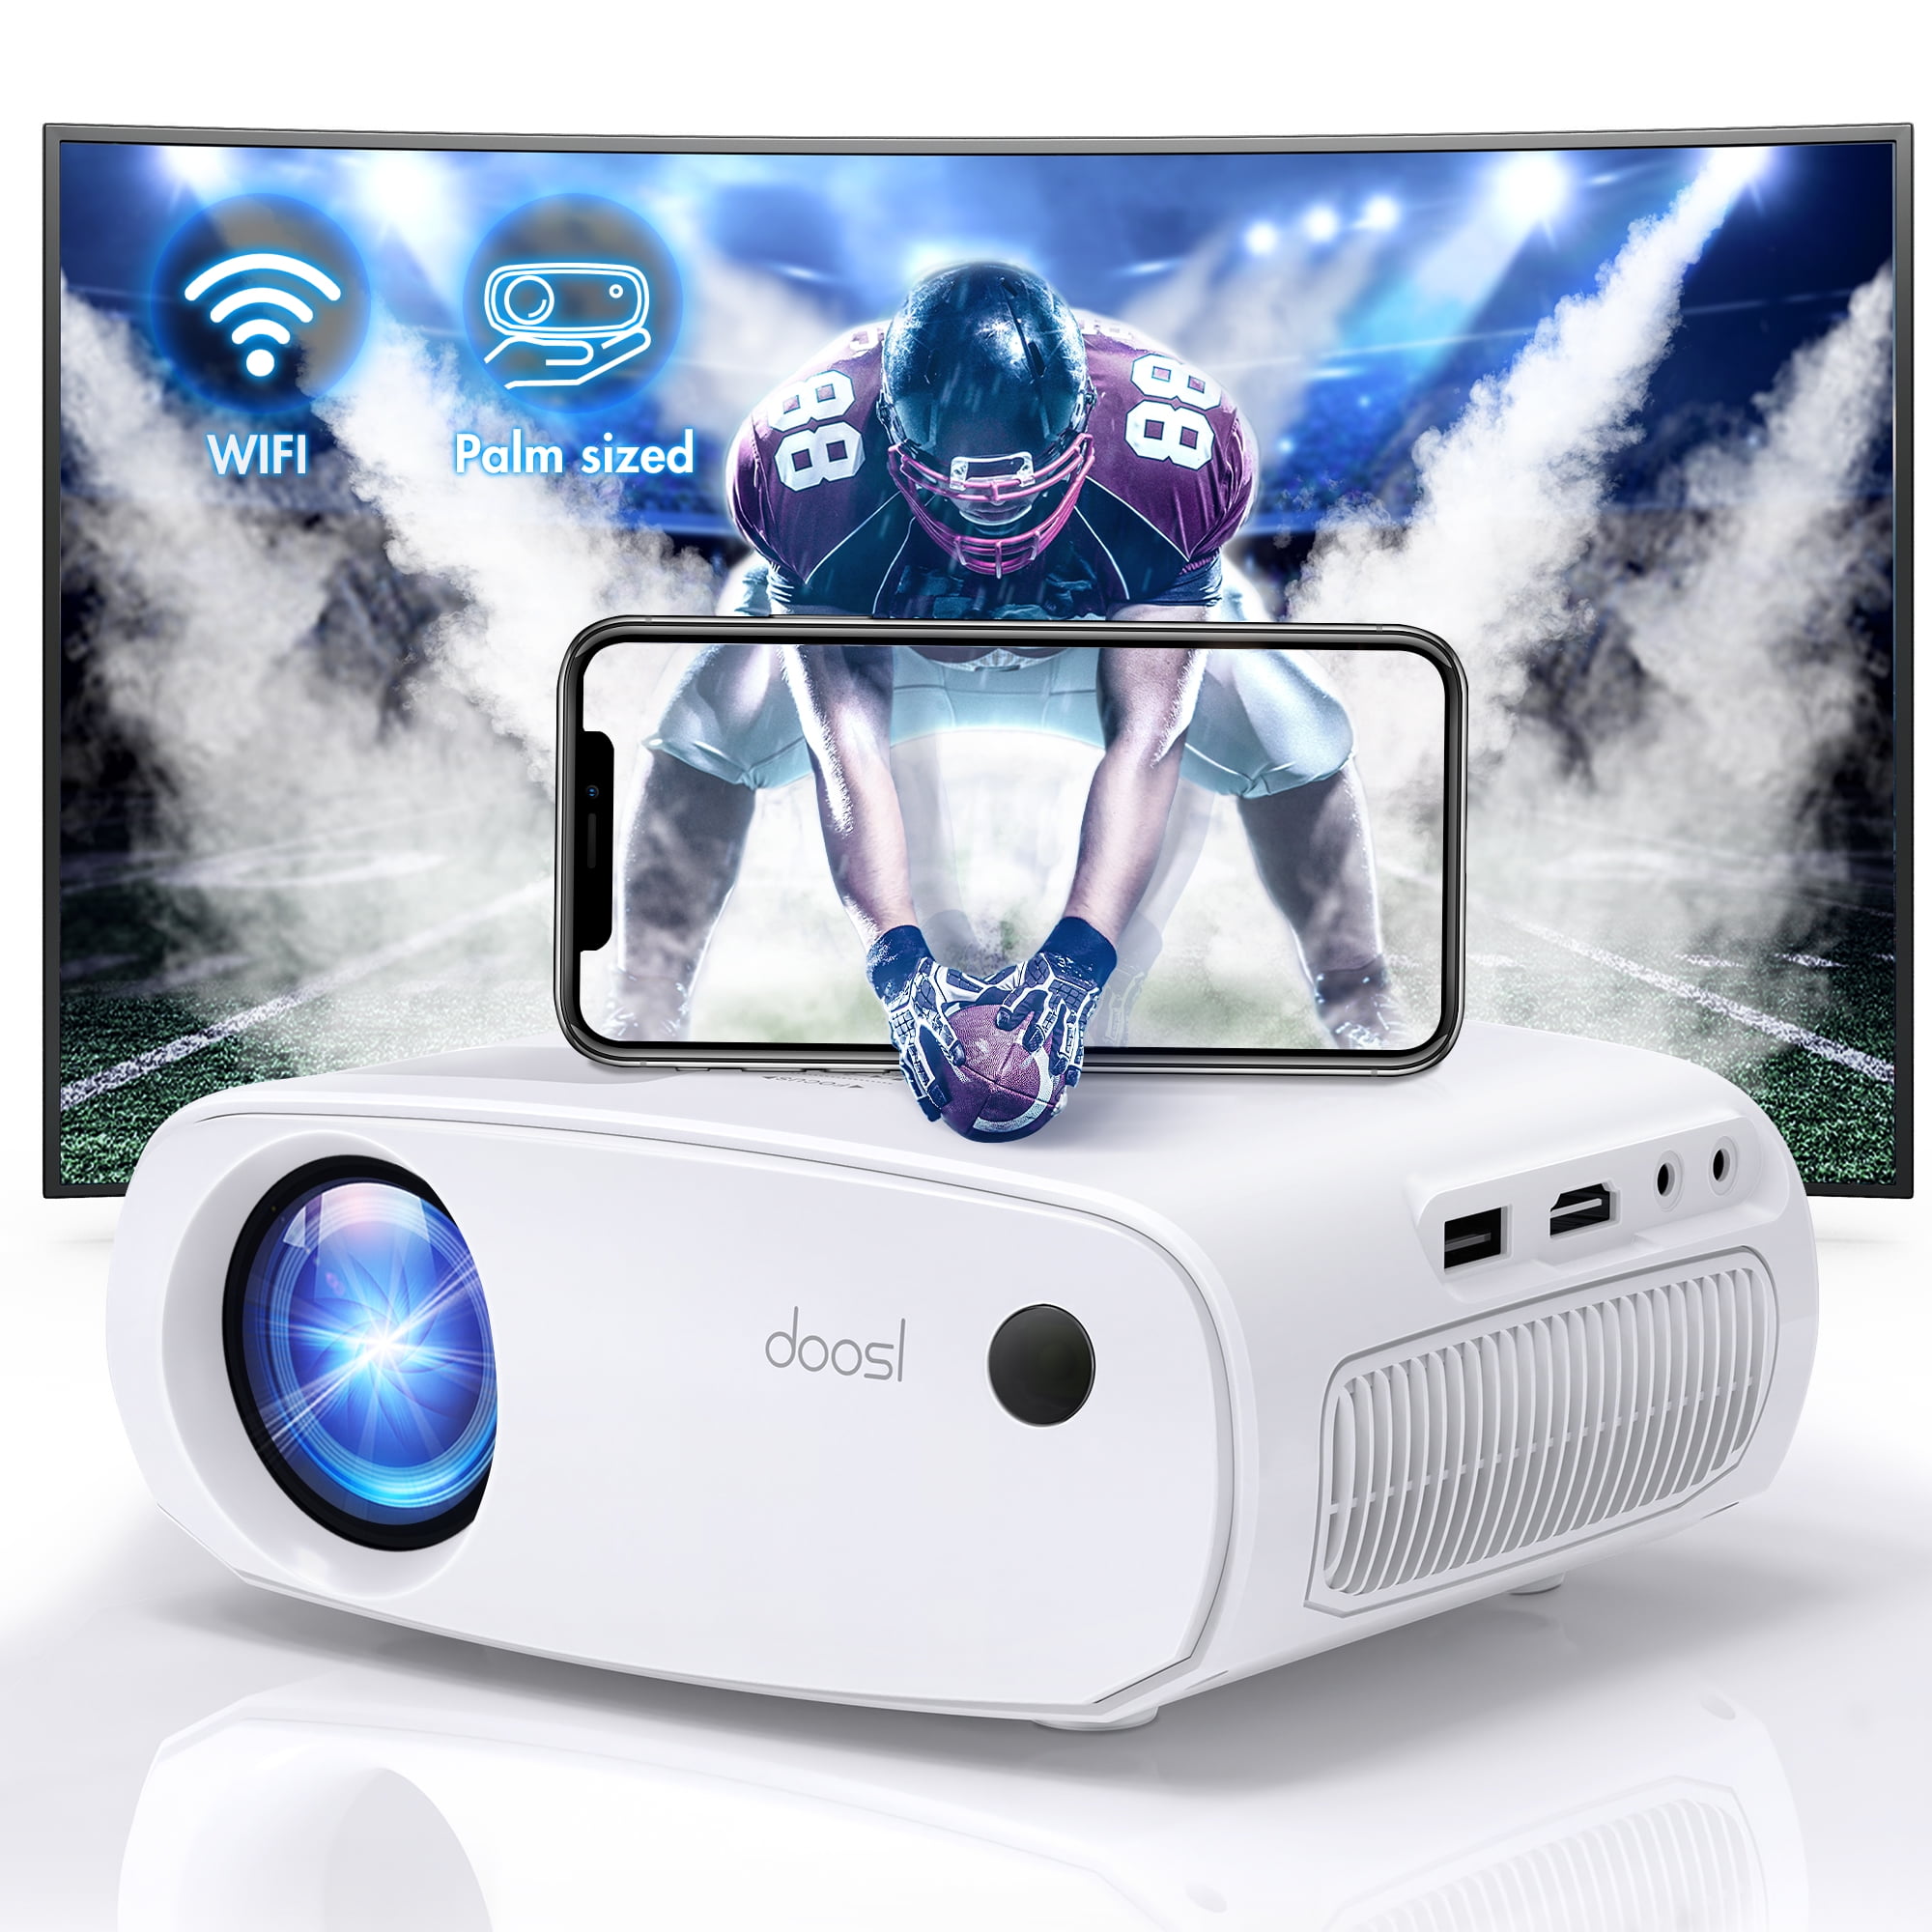 Doosl Mini Wifi Projector, Portable Outdoor Movie Projector for iPhone, LCD HD 1080P Supported, Hours LED Lamp Life, Home Theater Projectors Compatible with iOS Android Phone, White - Walmart.com